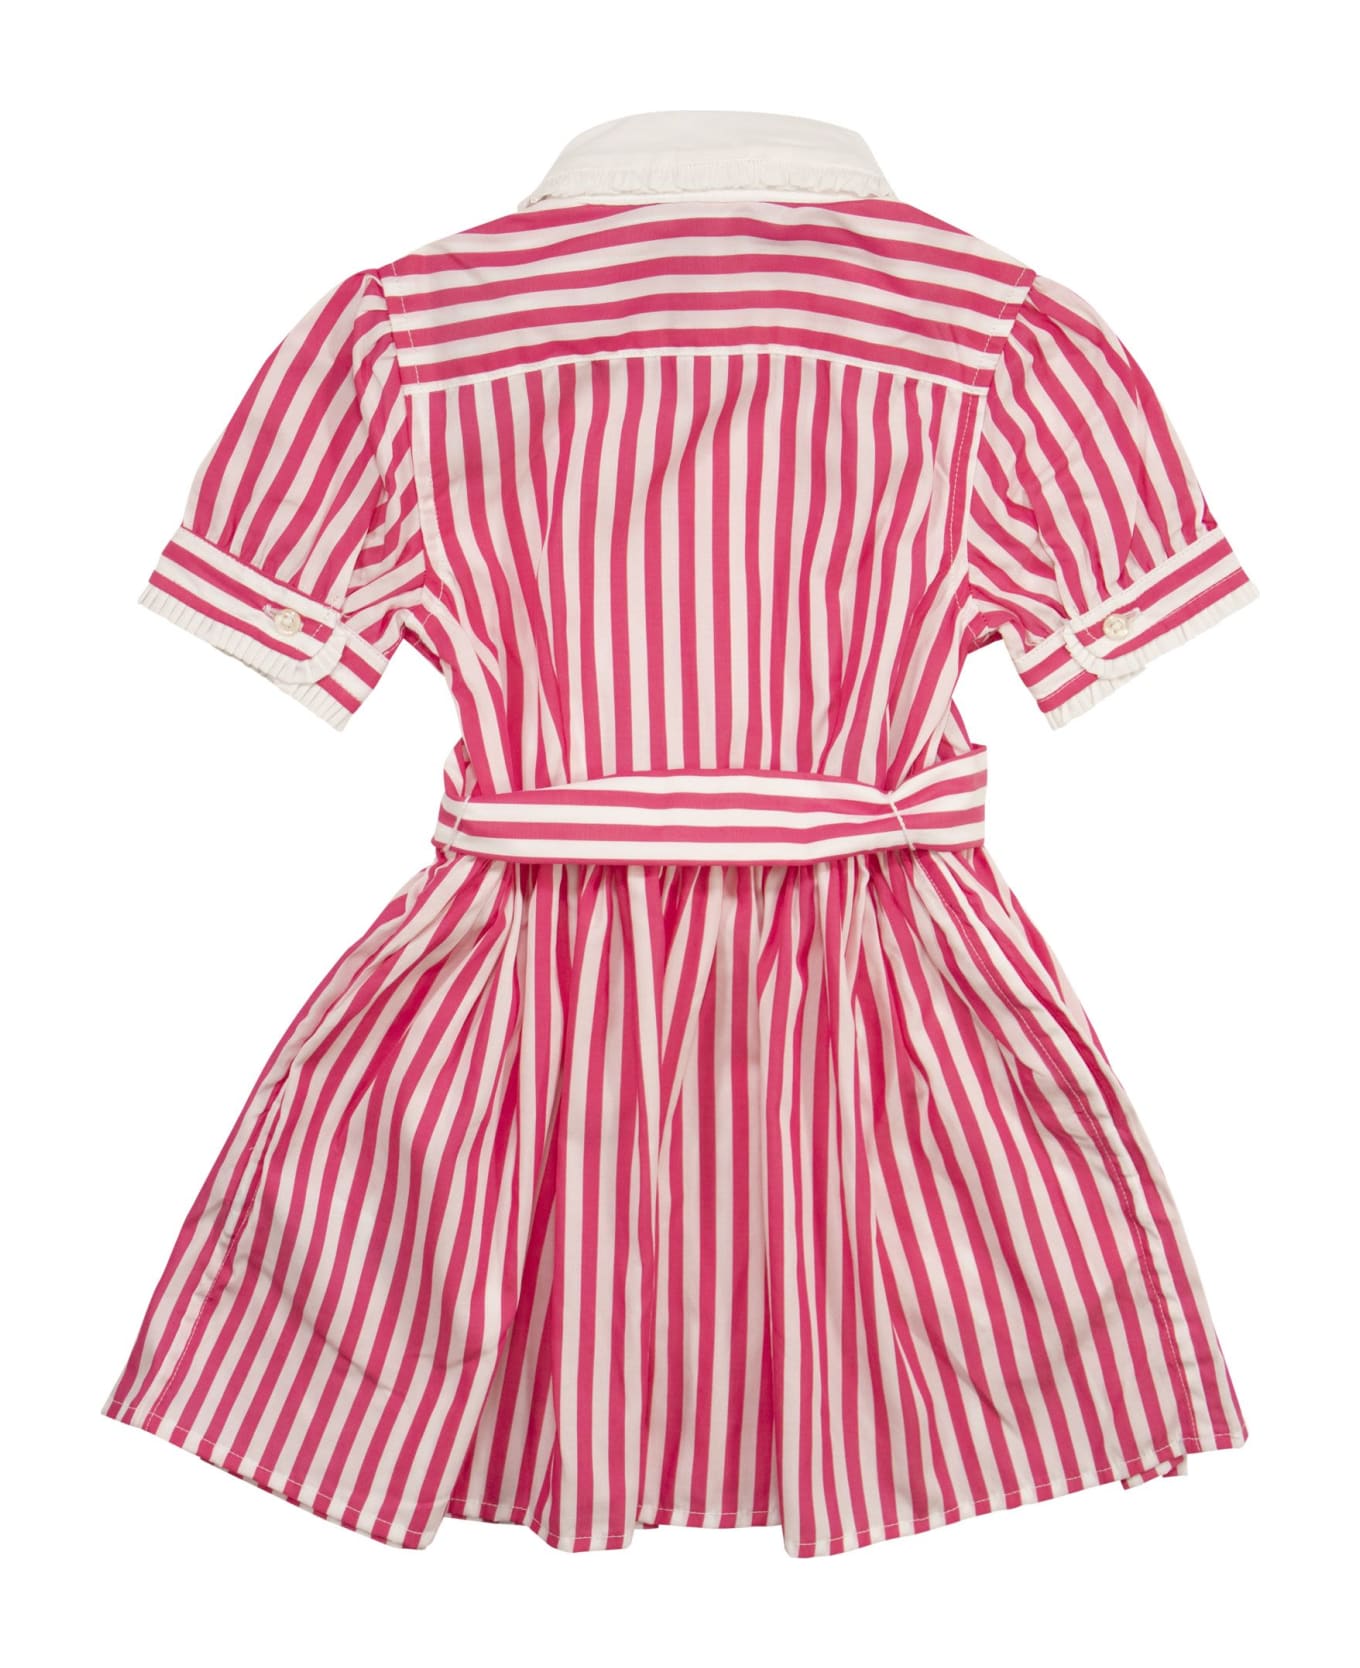 Polo Ralph Lauren Striped Cotton Chemisier With Belt - Pink/white